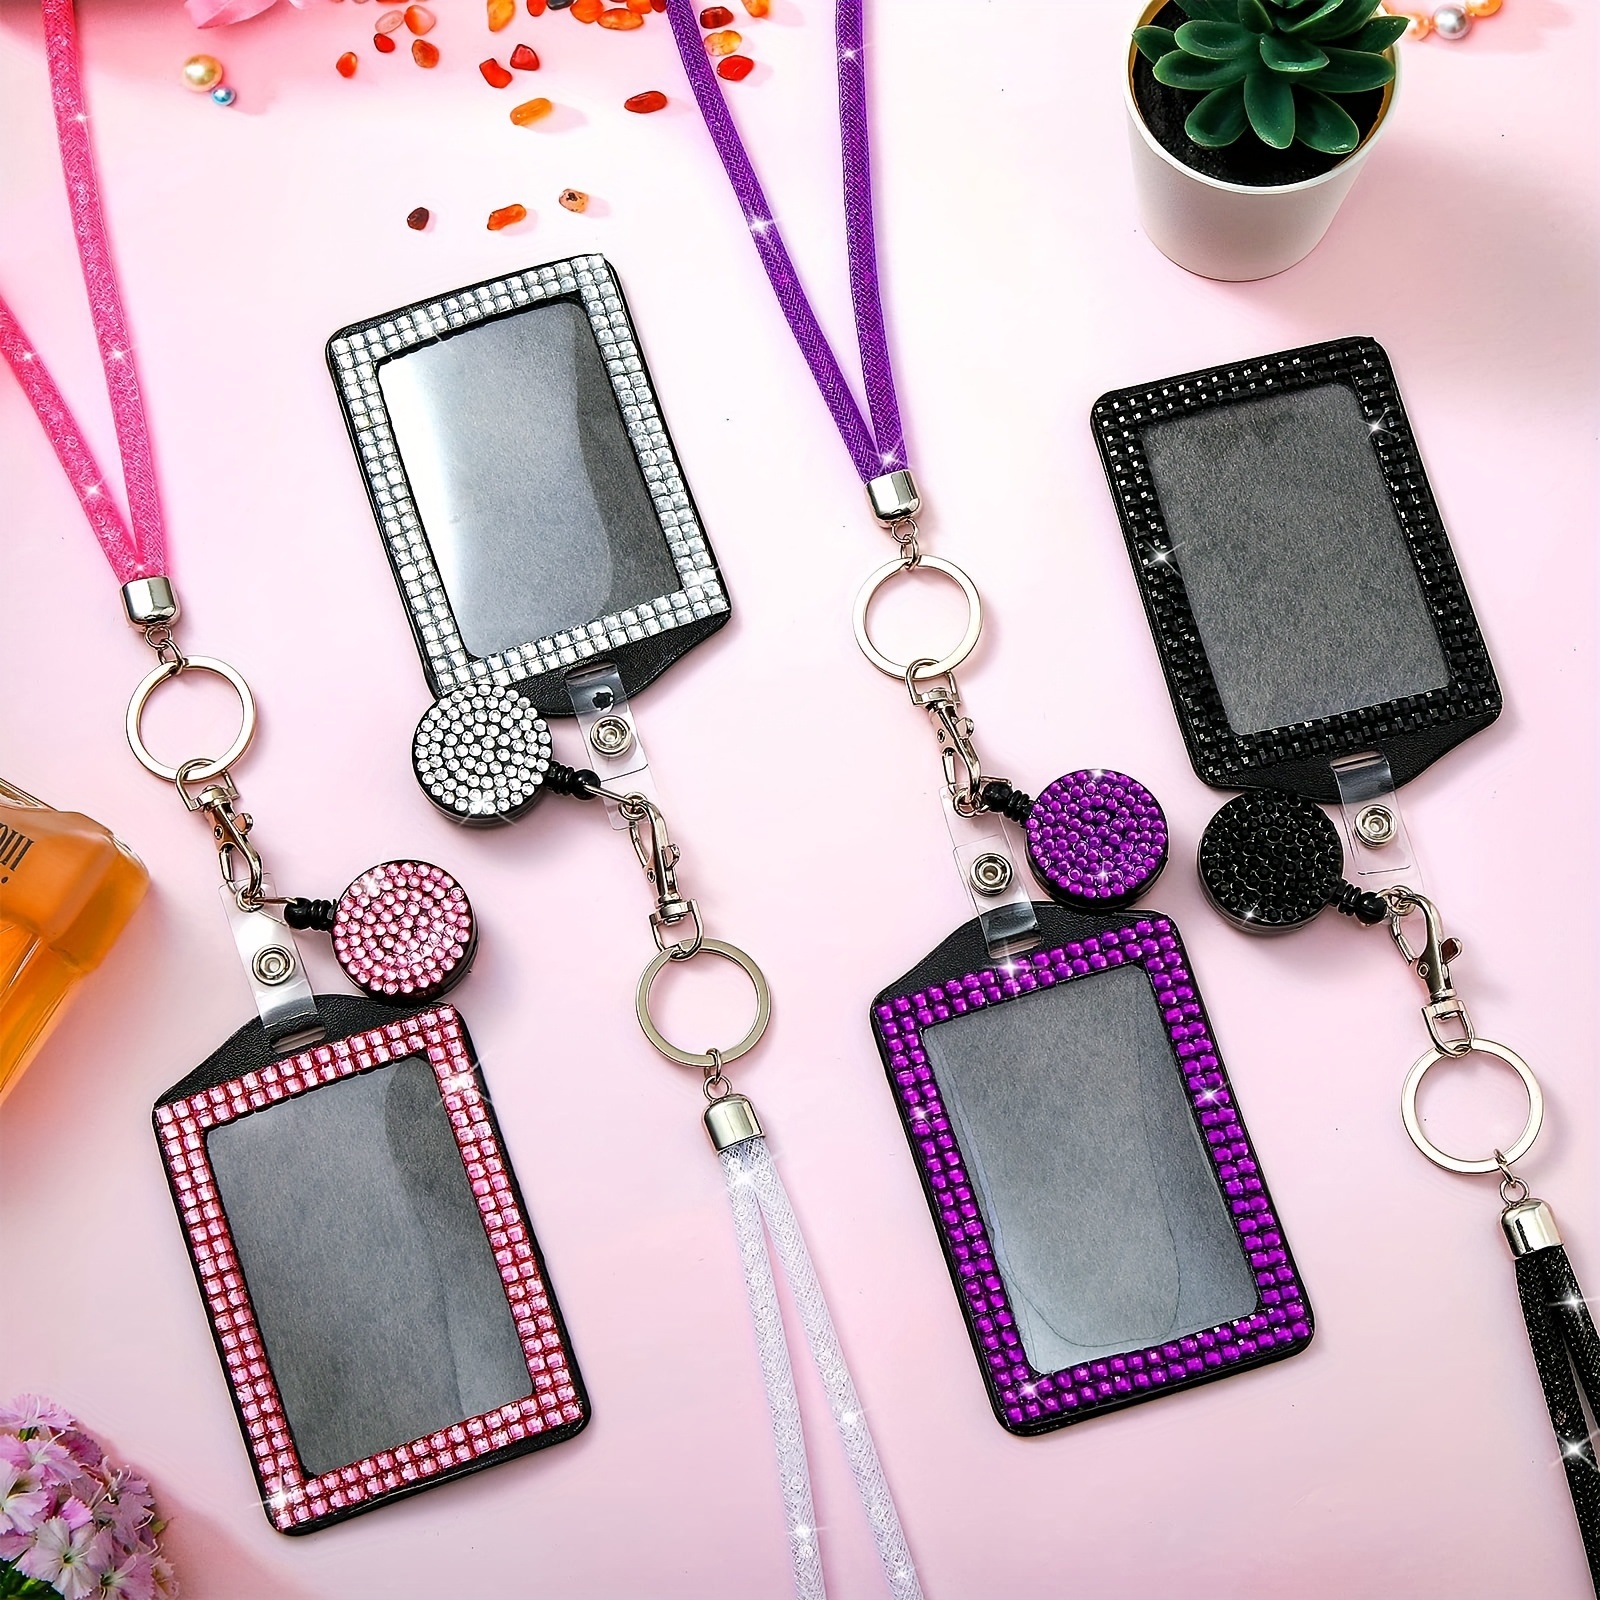 Fashion 12 Hot Colors Mix Handmade Sparkle Crystal Neck Lanyard,Exclusive  Bling ID Name Badge Holder,Retractable Rhinestone Work Badge Reel Clip